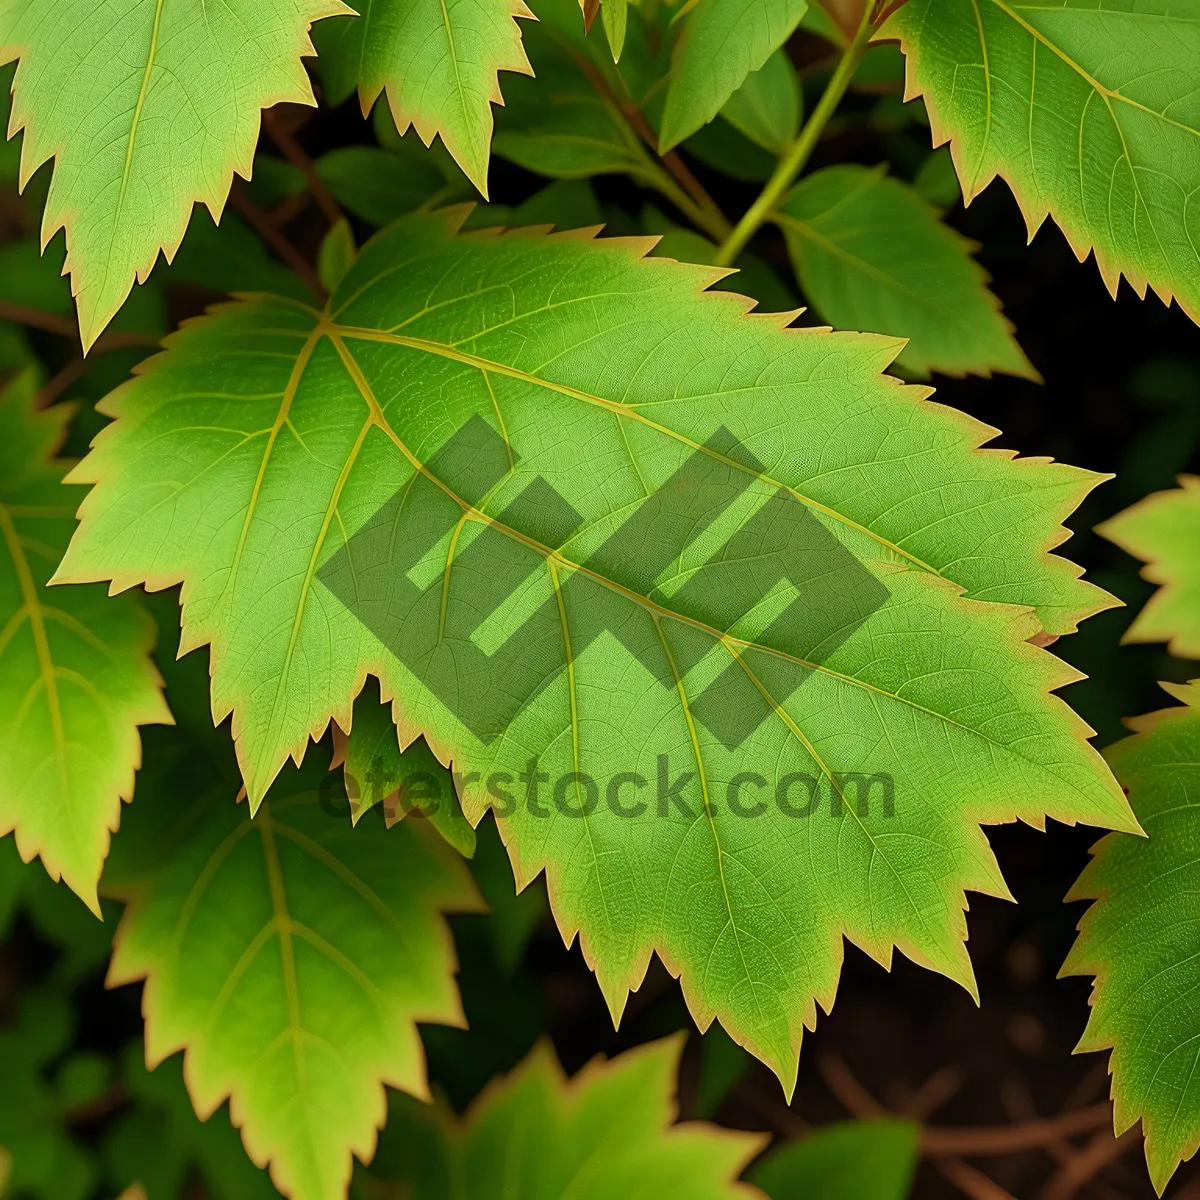 Picture of lush maple leaves in a sunlit forest